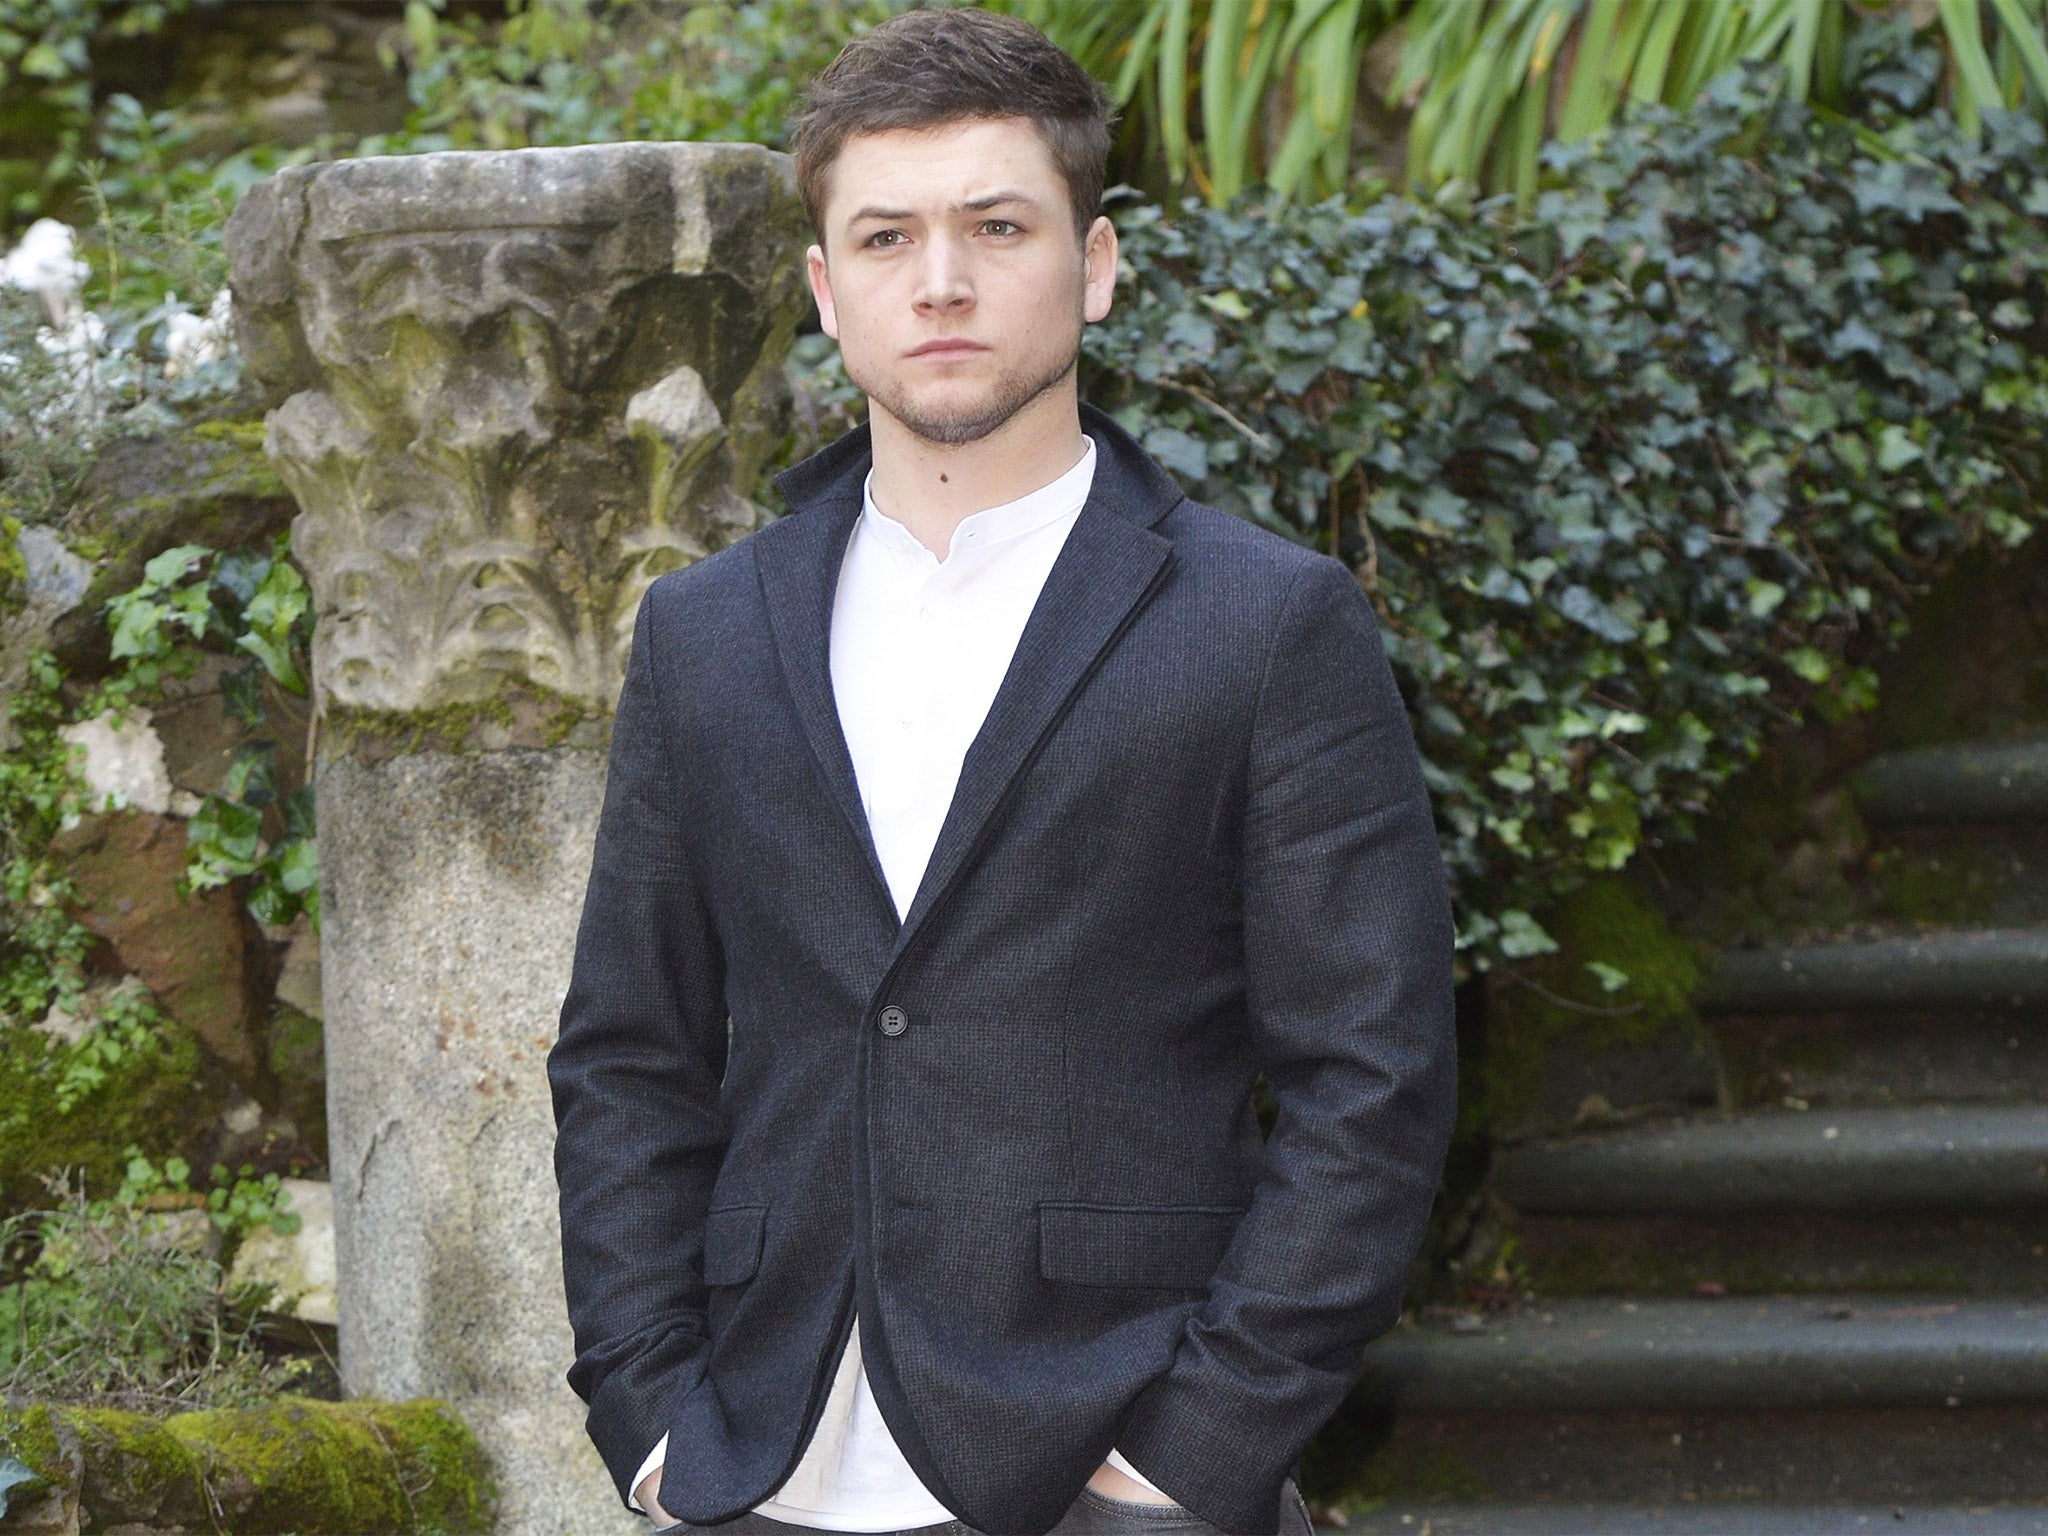 Taron Egerton: 'The perception is your life changes overnight and you wear Dolce and Gabanna and drive a Mercedes'